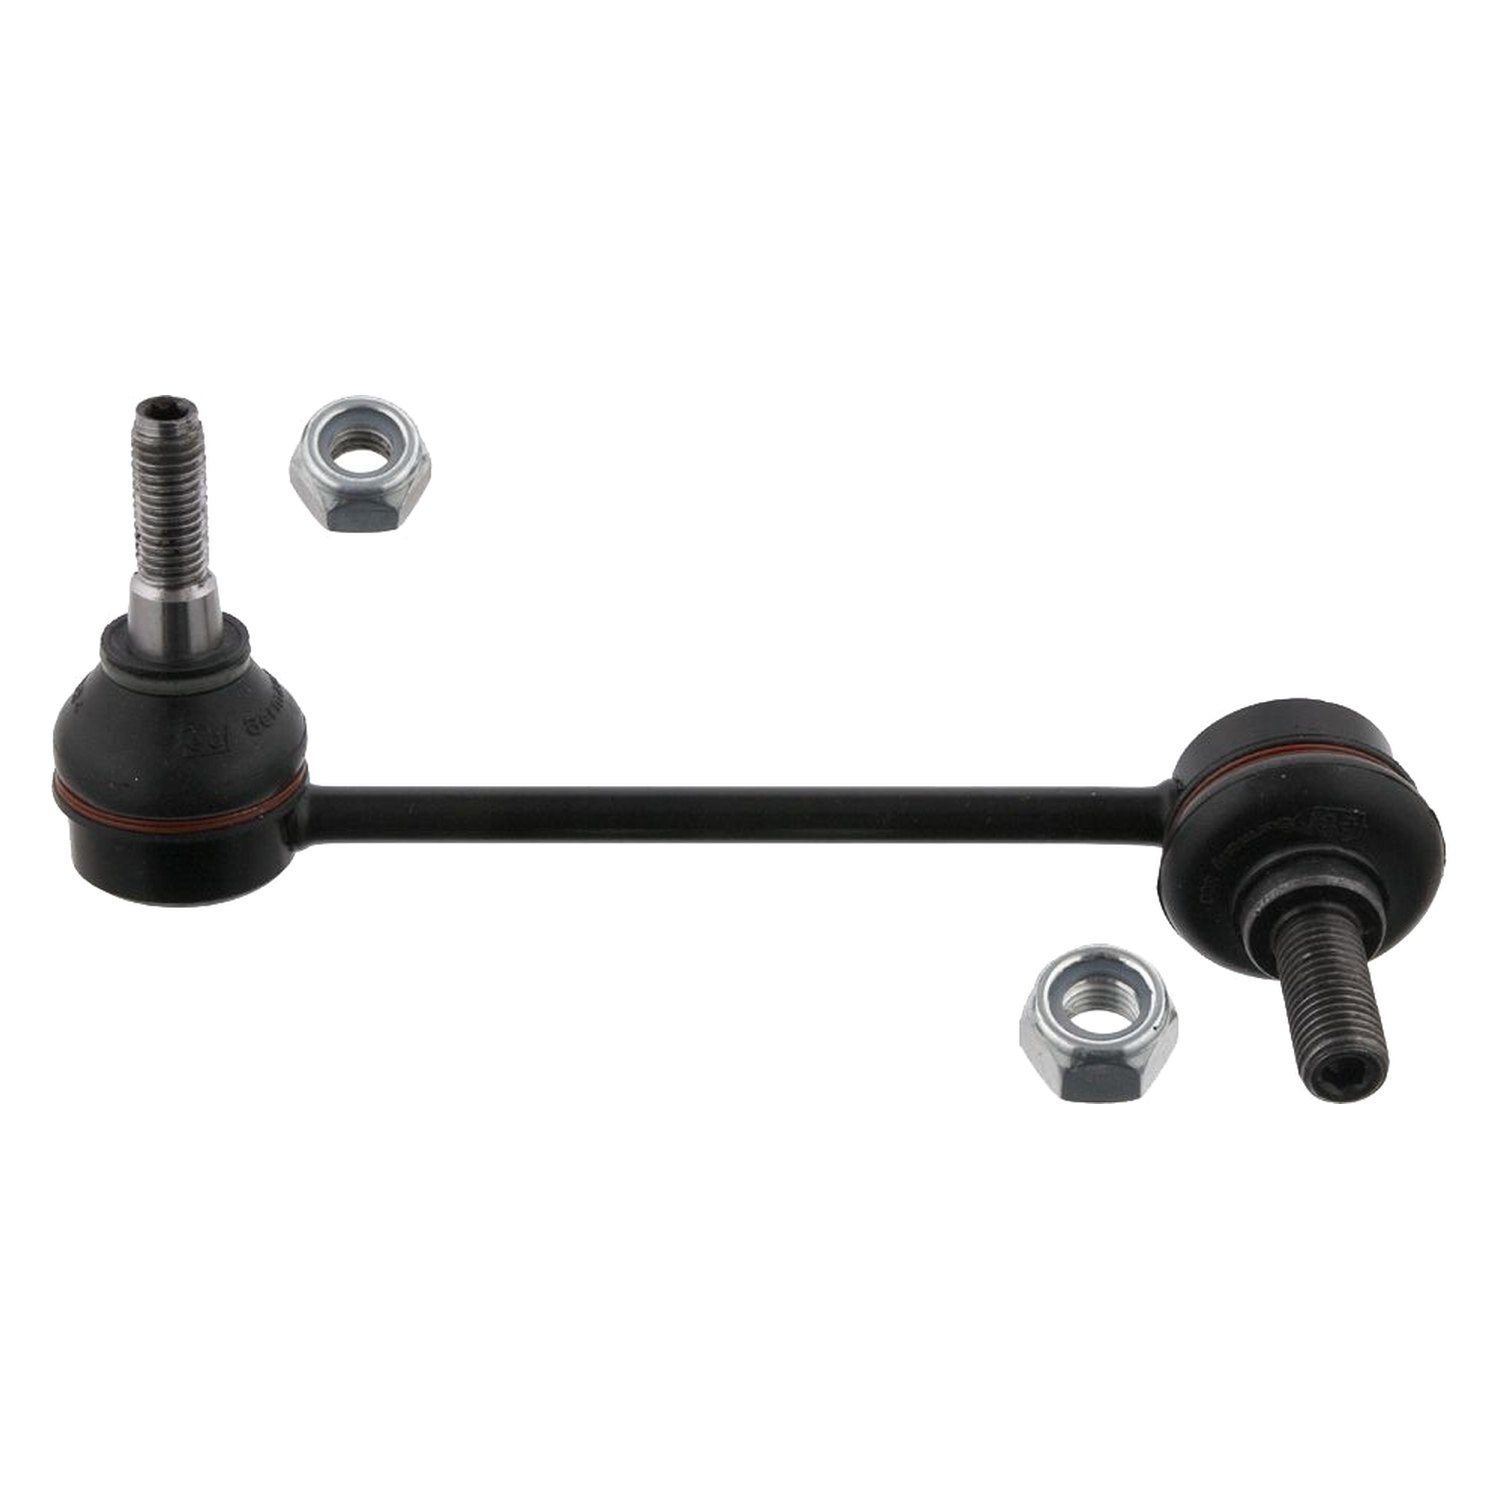 Stabilizer Sway Bar Link Front Pair Set of 2 for MB W140 300 400 500 600 CL S